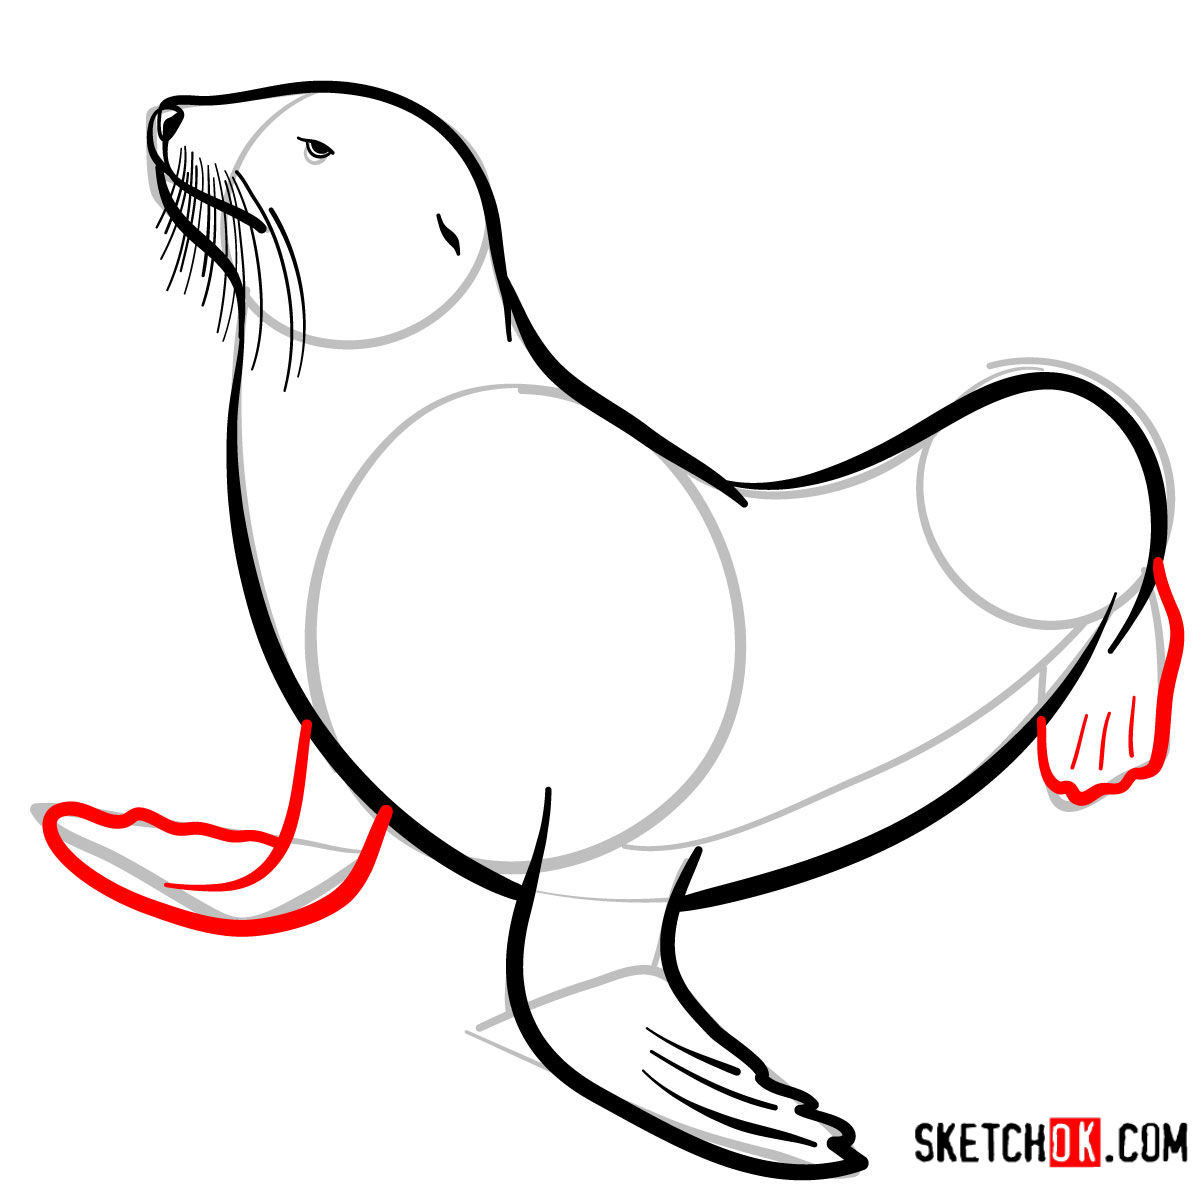 How to draw a Sea lion Sea Animals Sketchok easy drawing guides